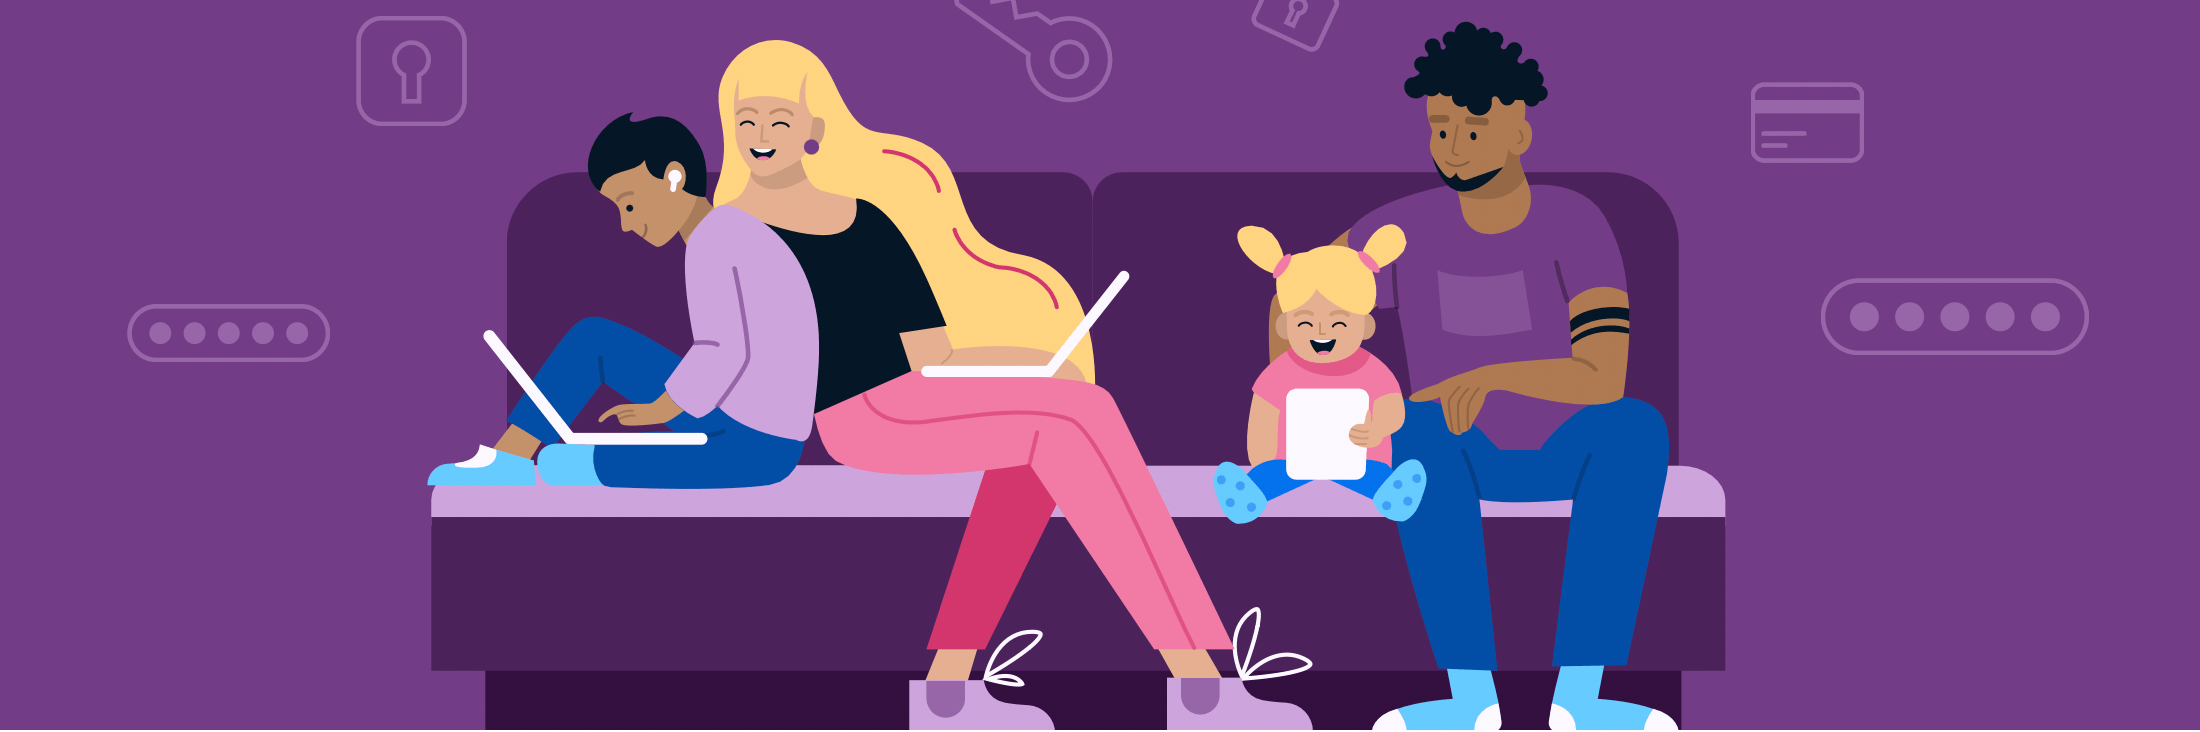 Illustration of 1Password for Families